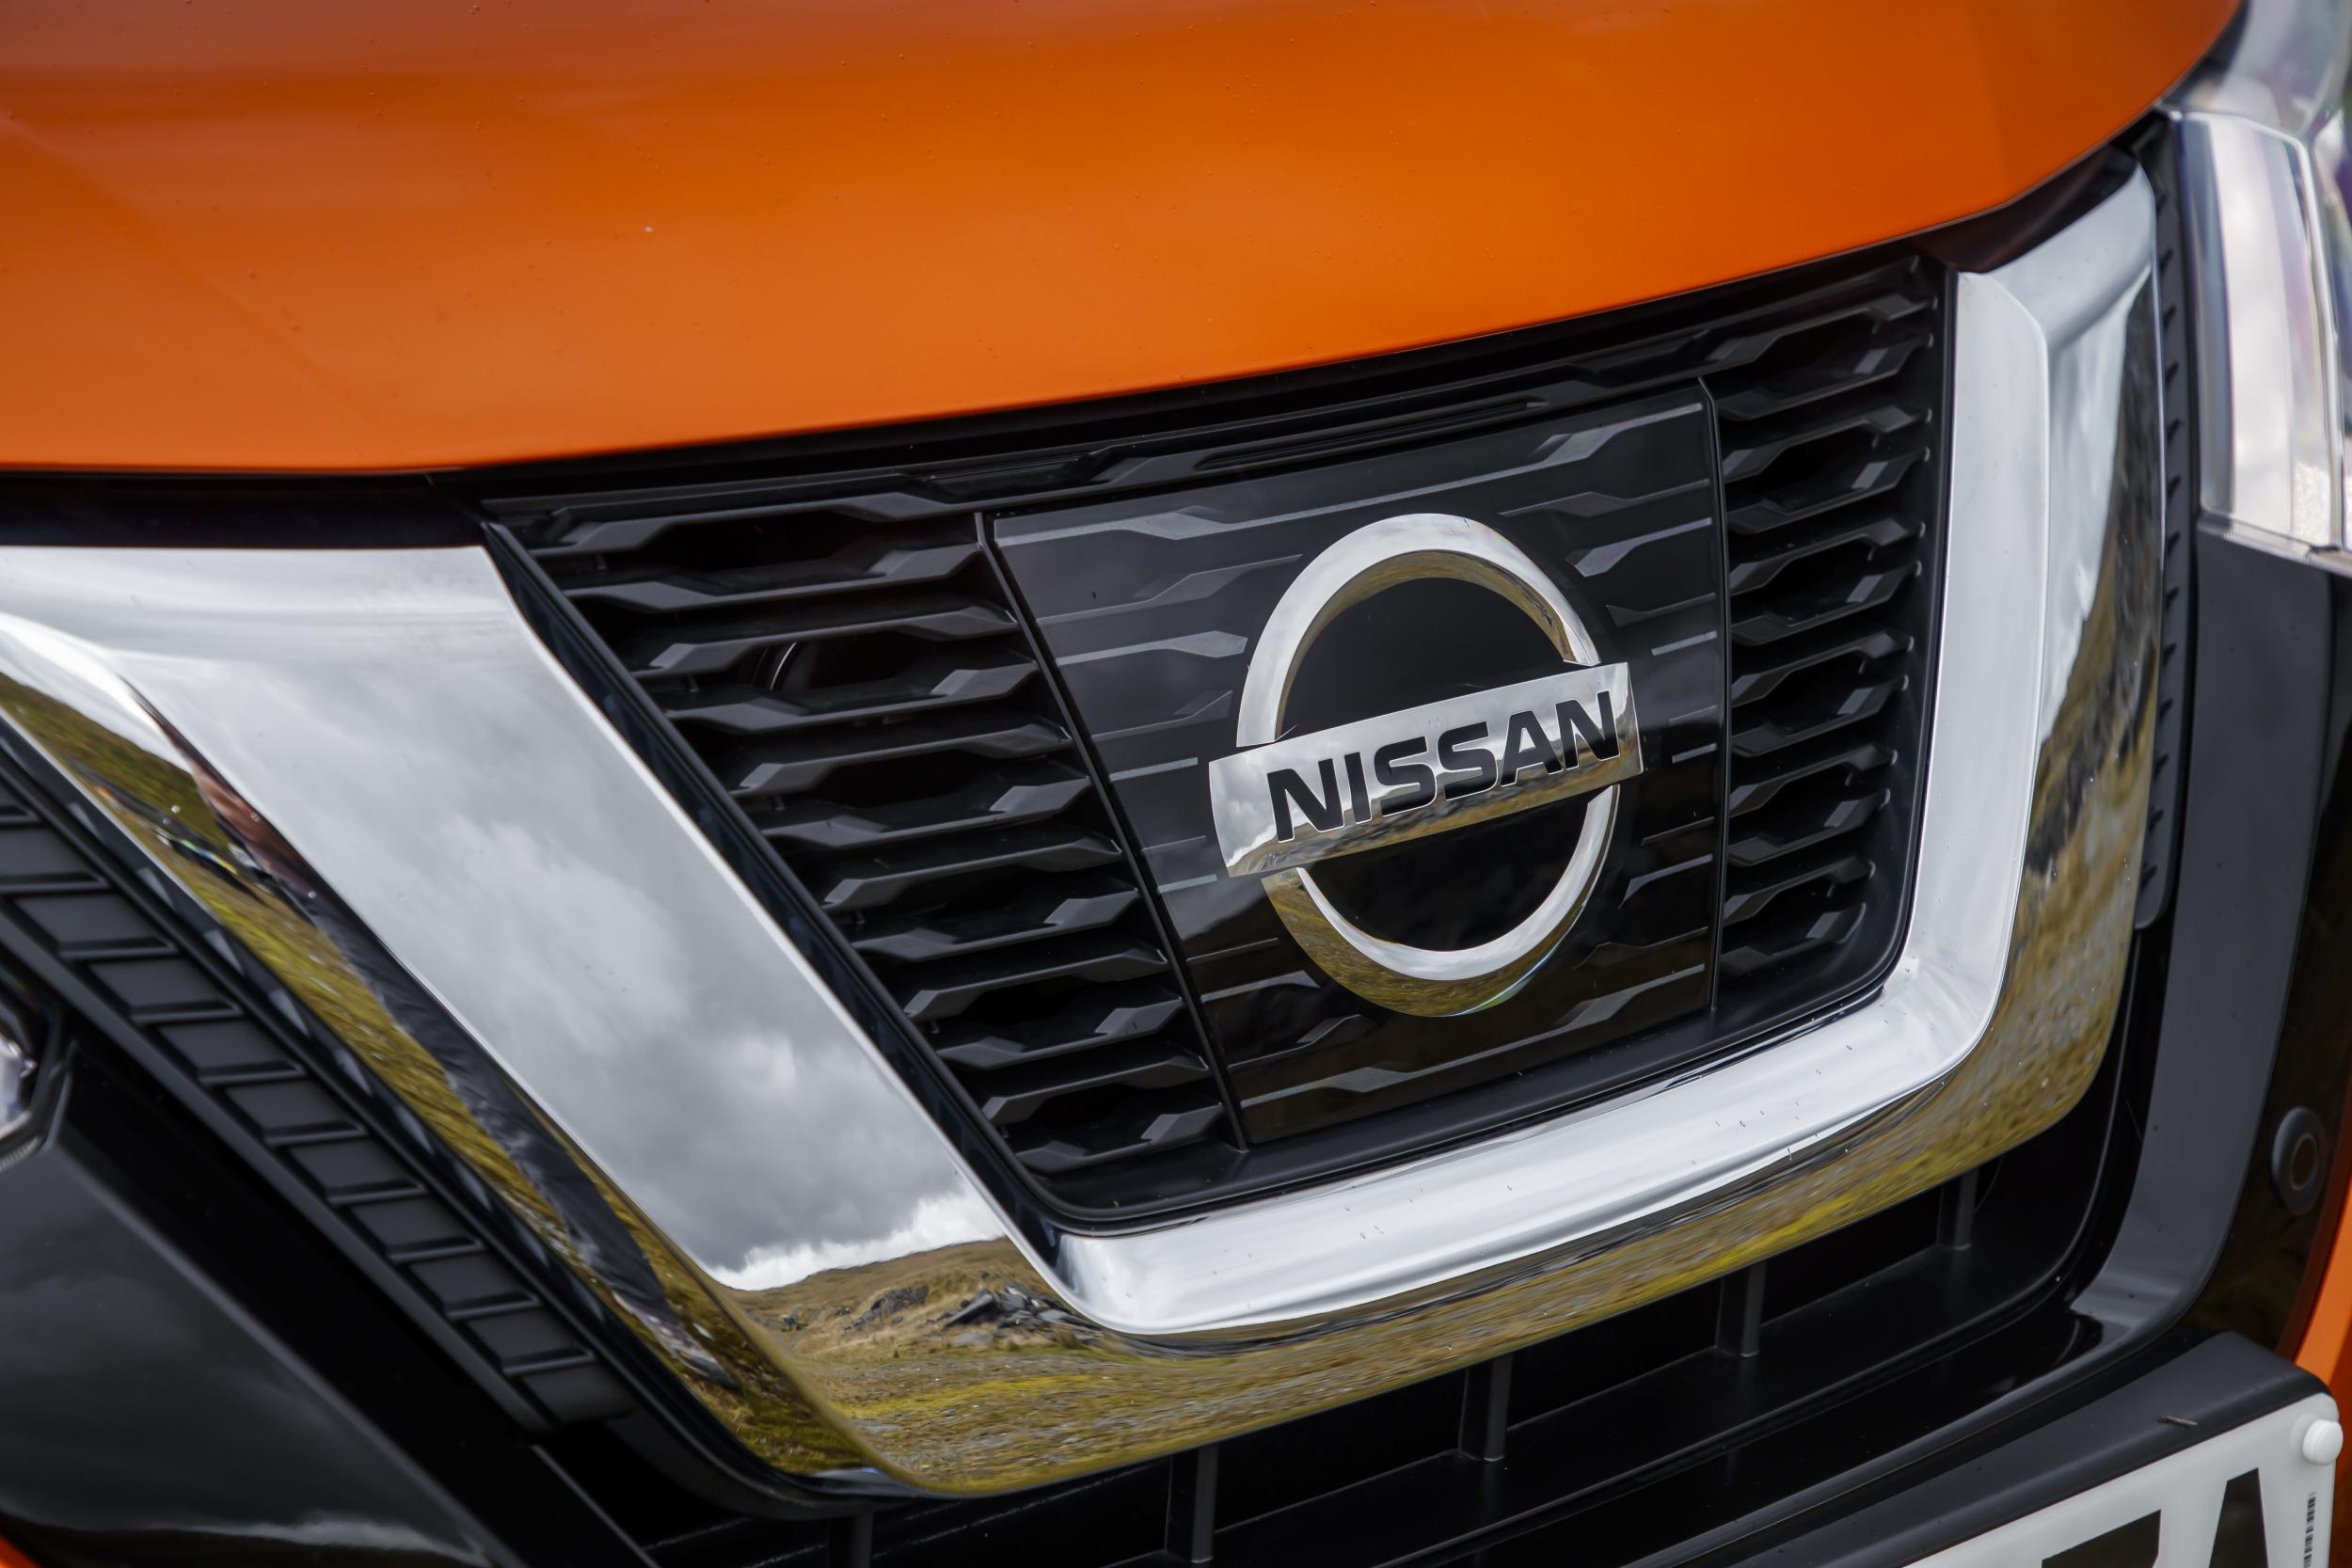 Nissan announced in October last year that it would build new cars at its north of England facility